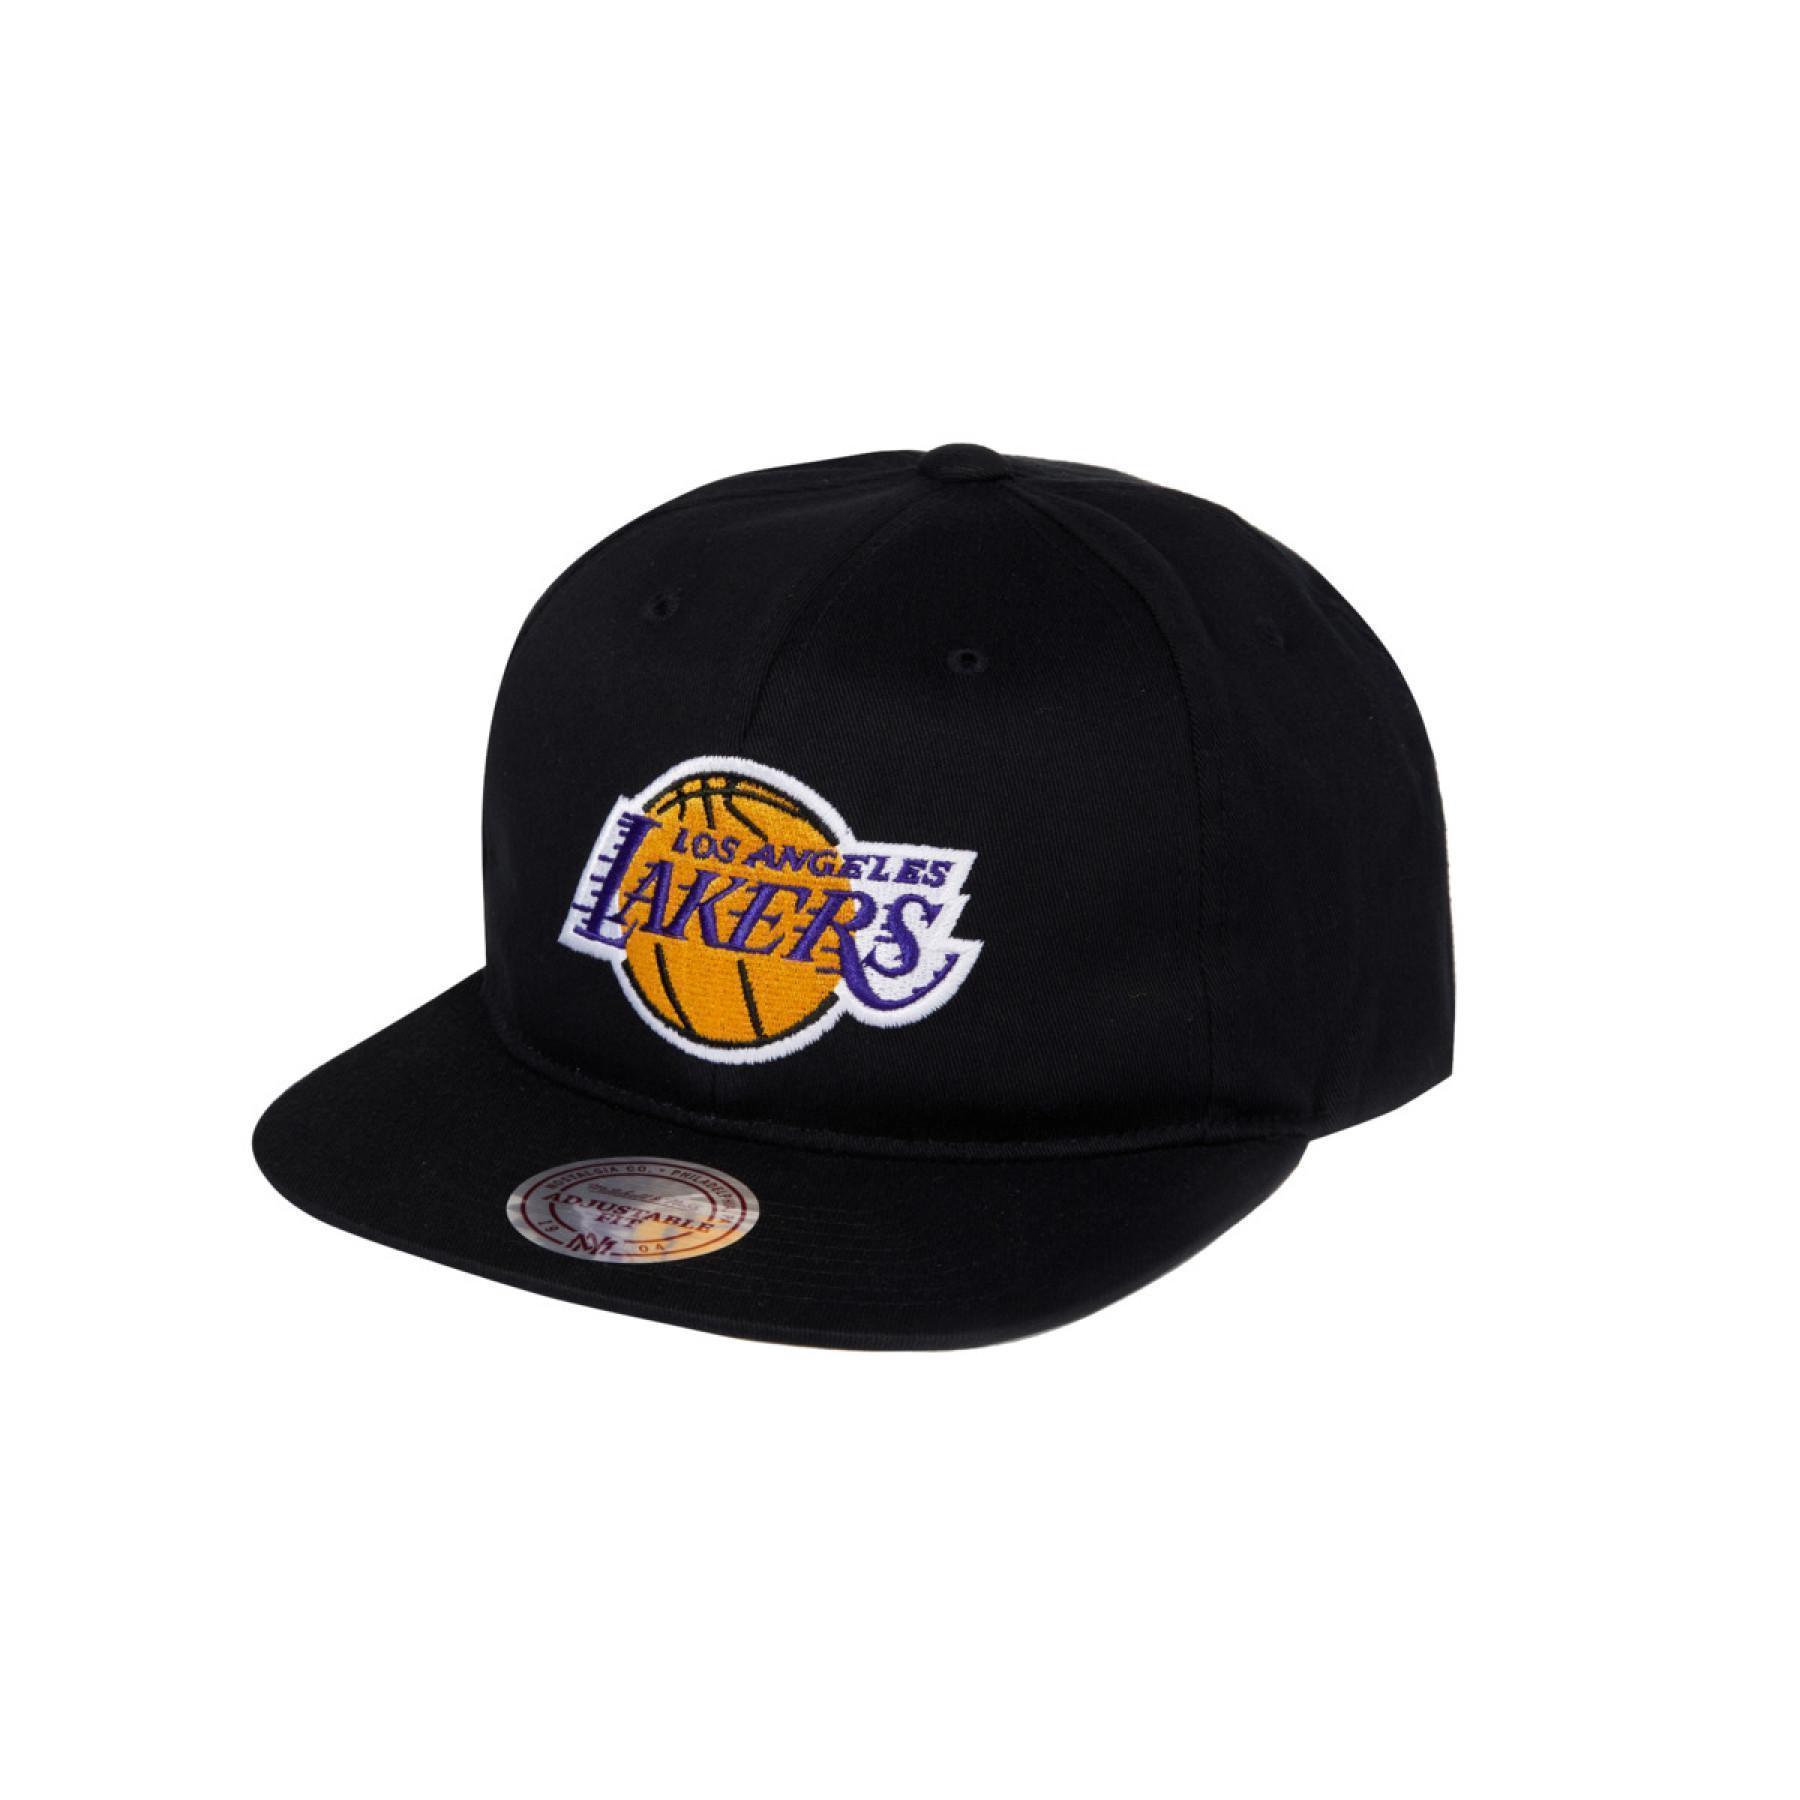 Casquette Los Angeles Lakers team logo deadstock throwback